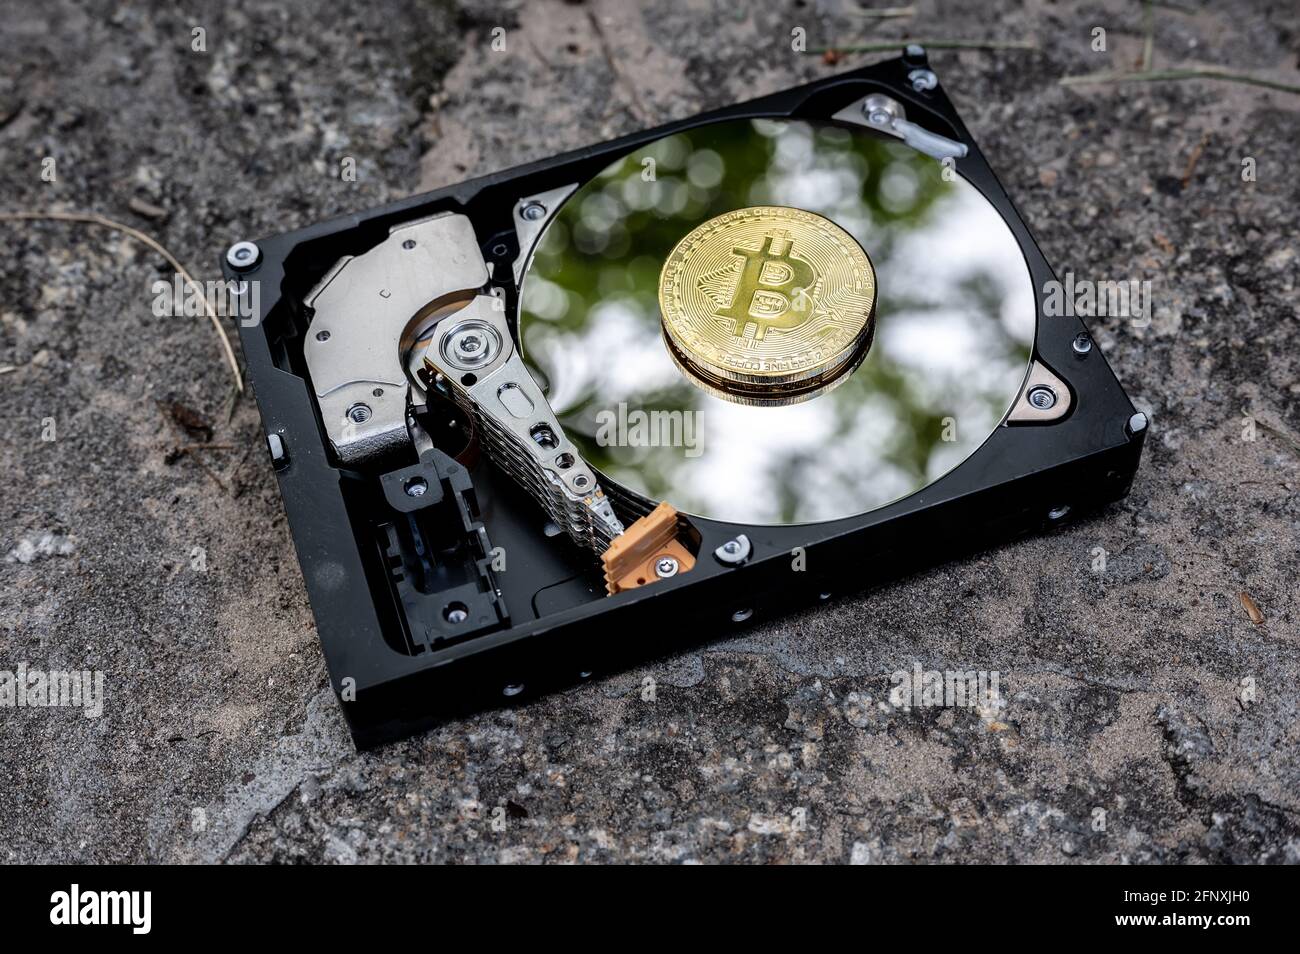 View on a hard disk drive on a concrete surface on a sunny day. Stock Photo